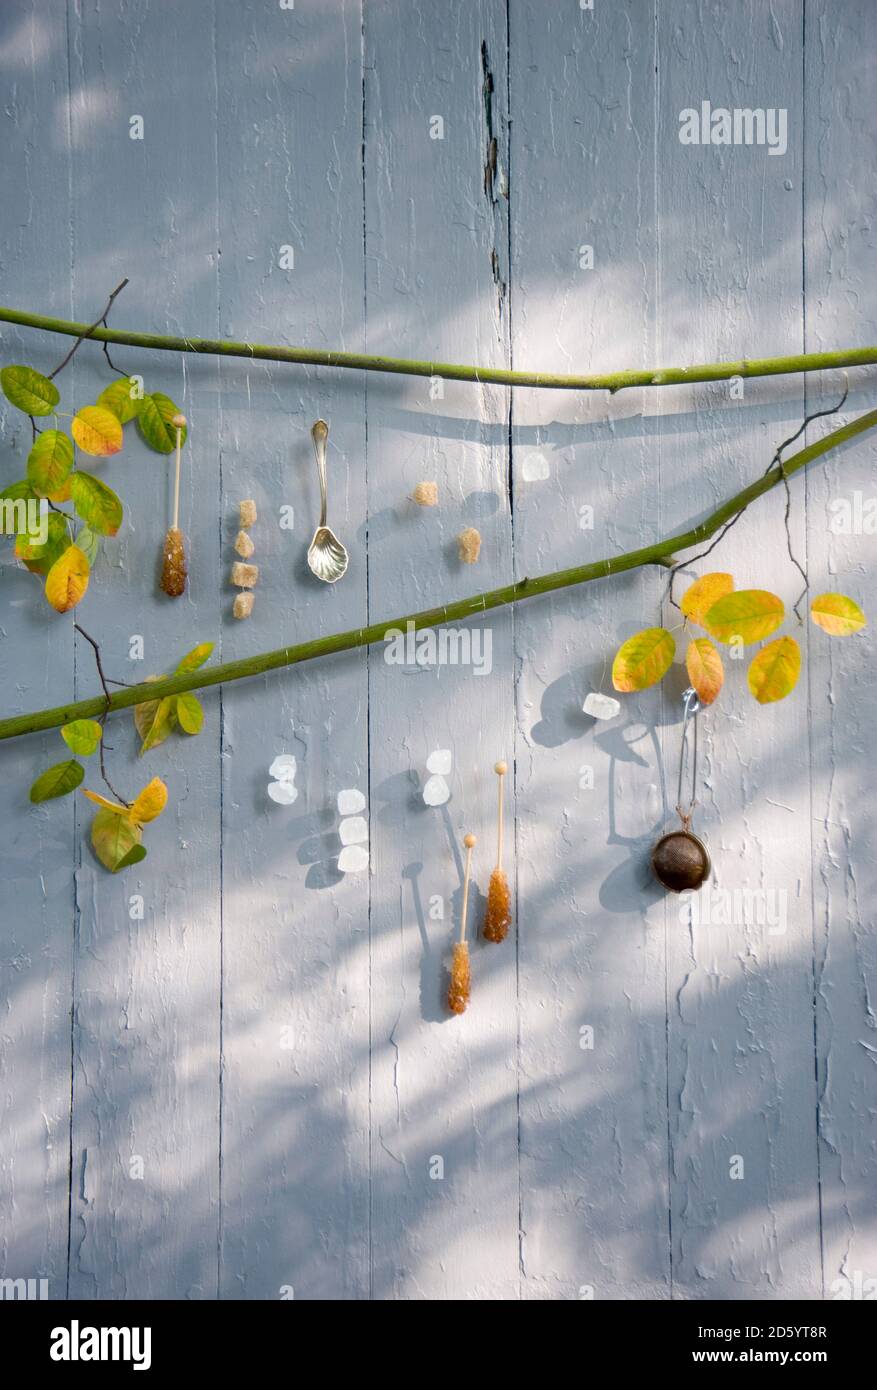 Twig with silver spoon, tea strainer and different rock candies Stock Photo